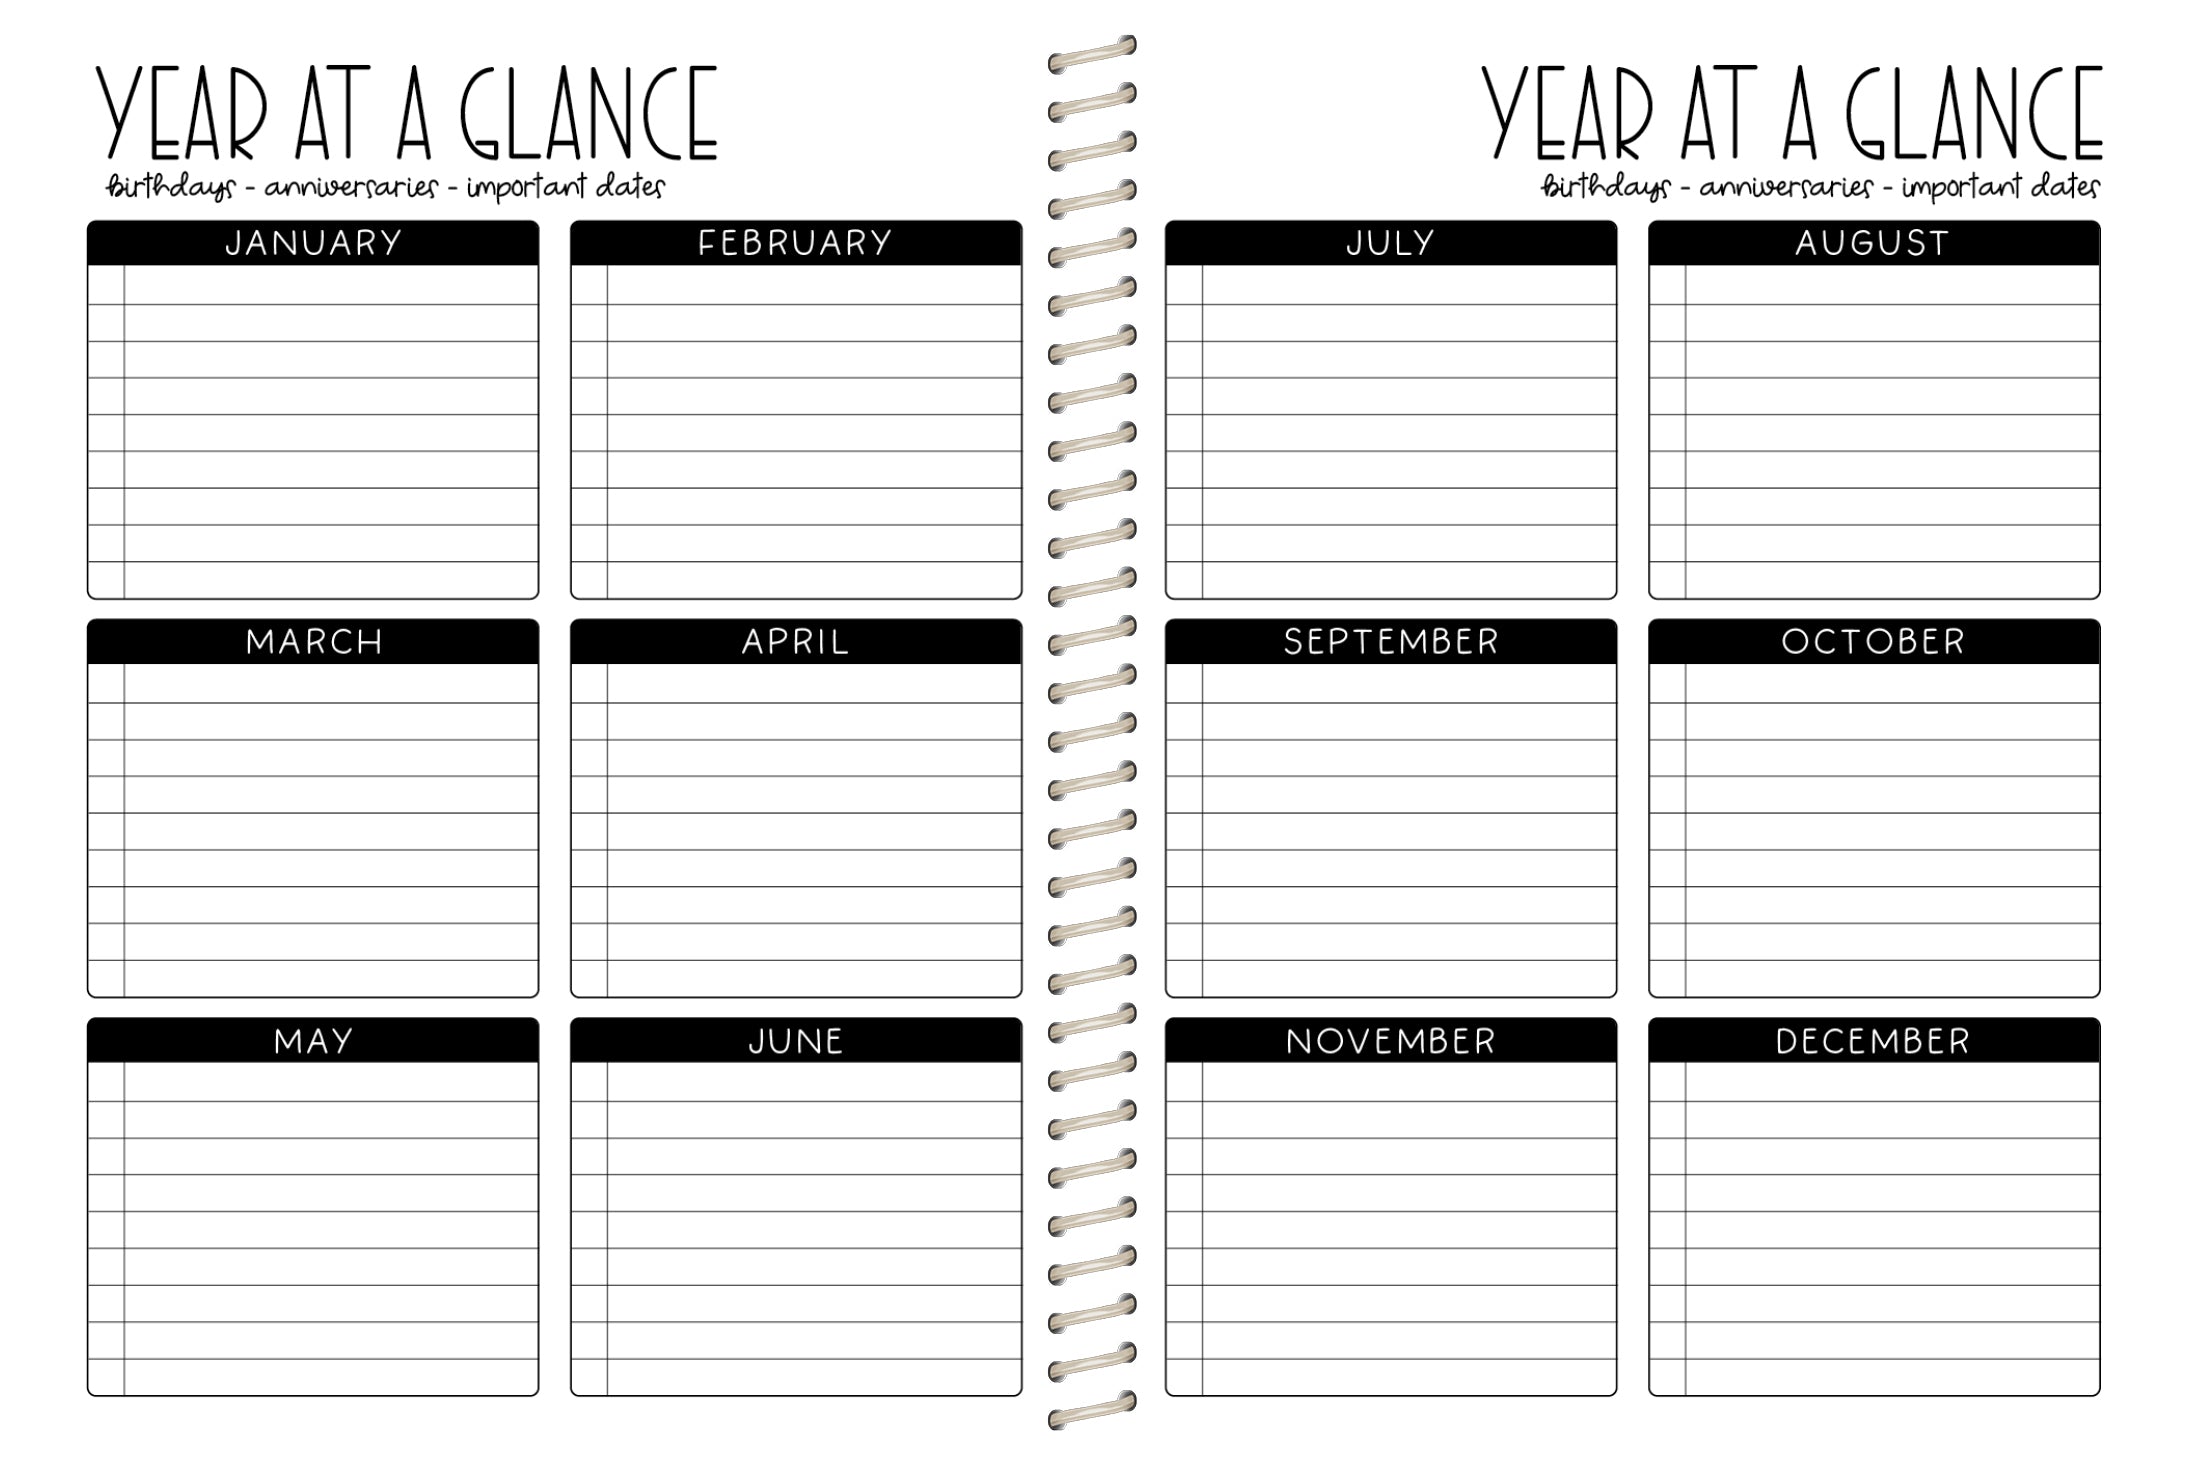 2024 Printed Weekly Planner - EMERALD GOLD GLAM